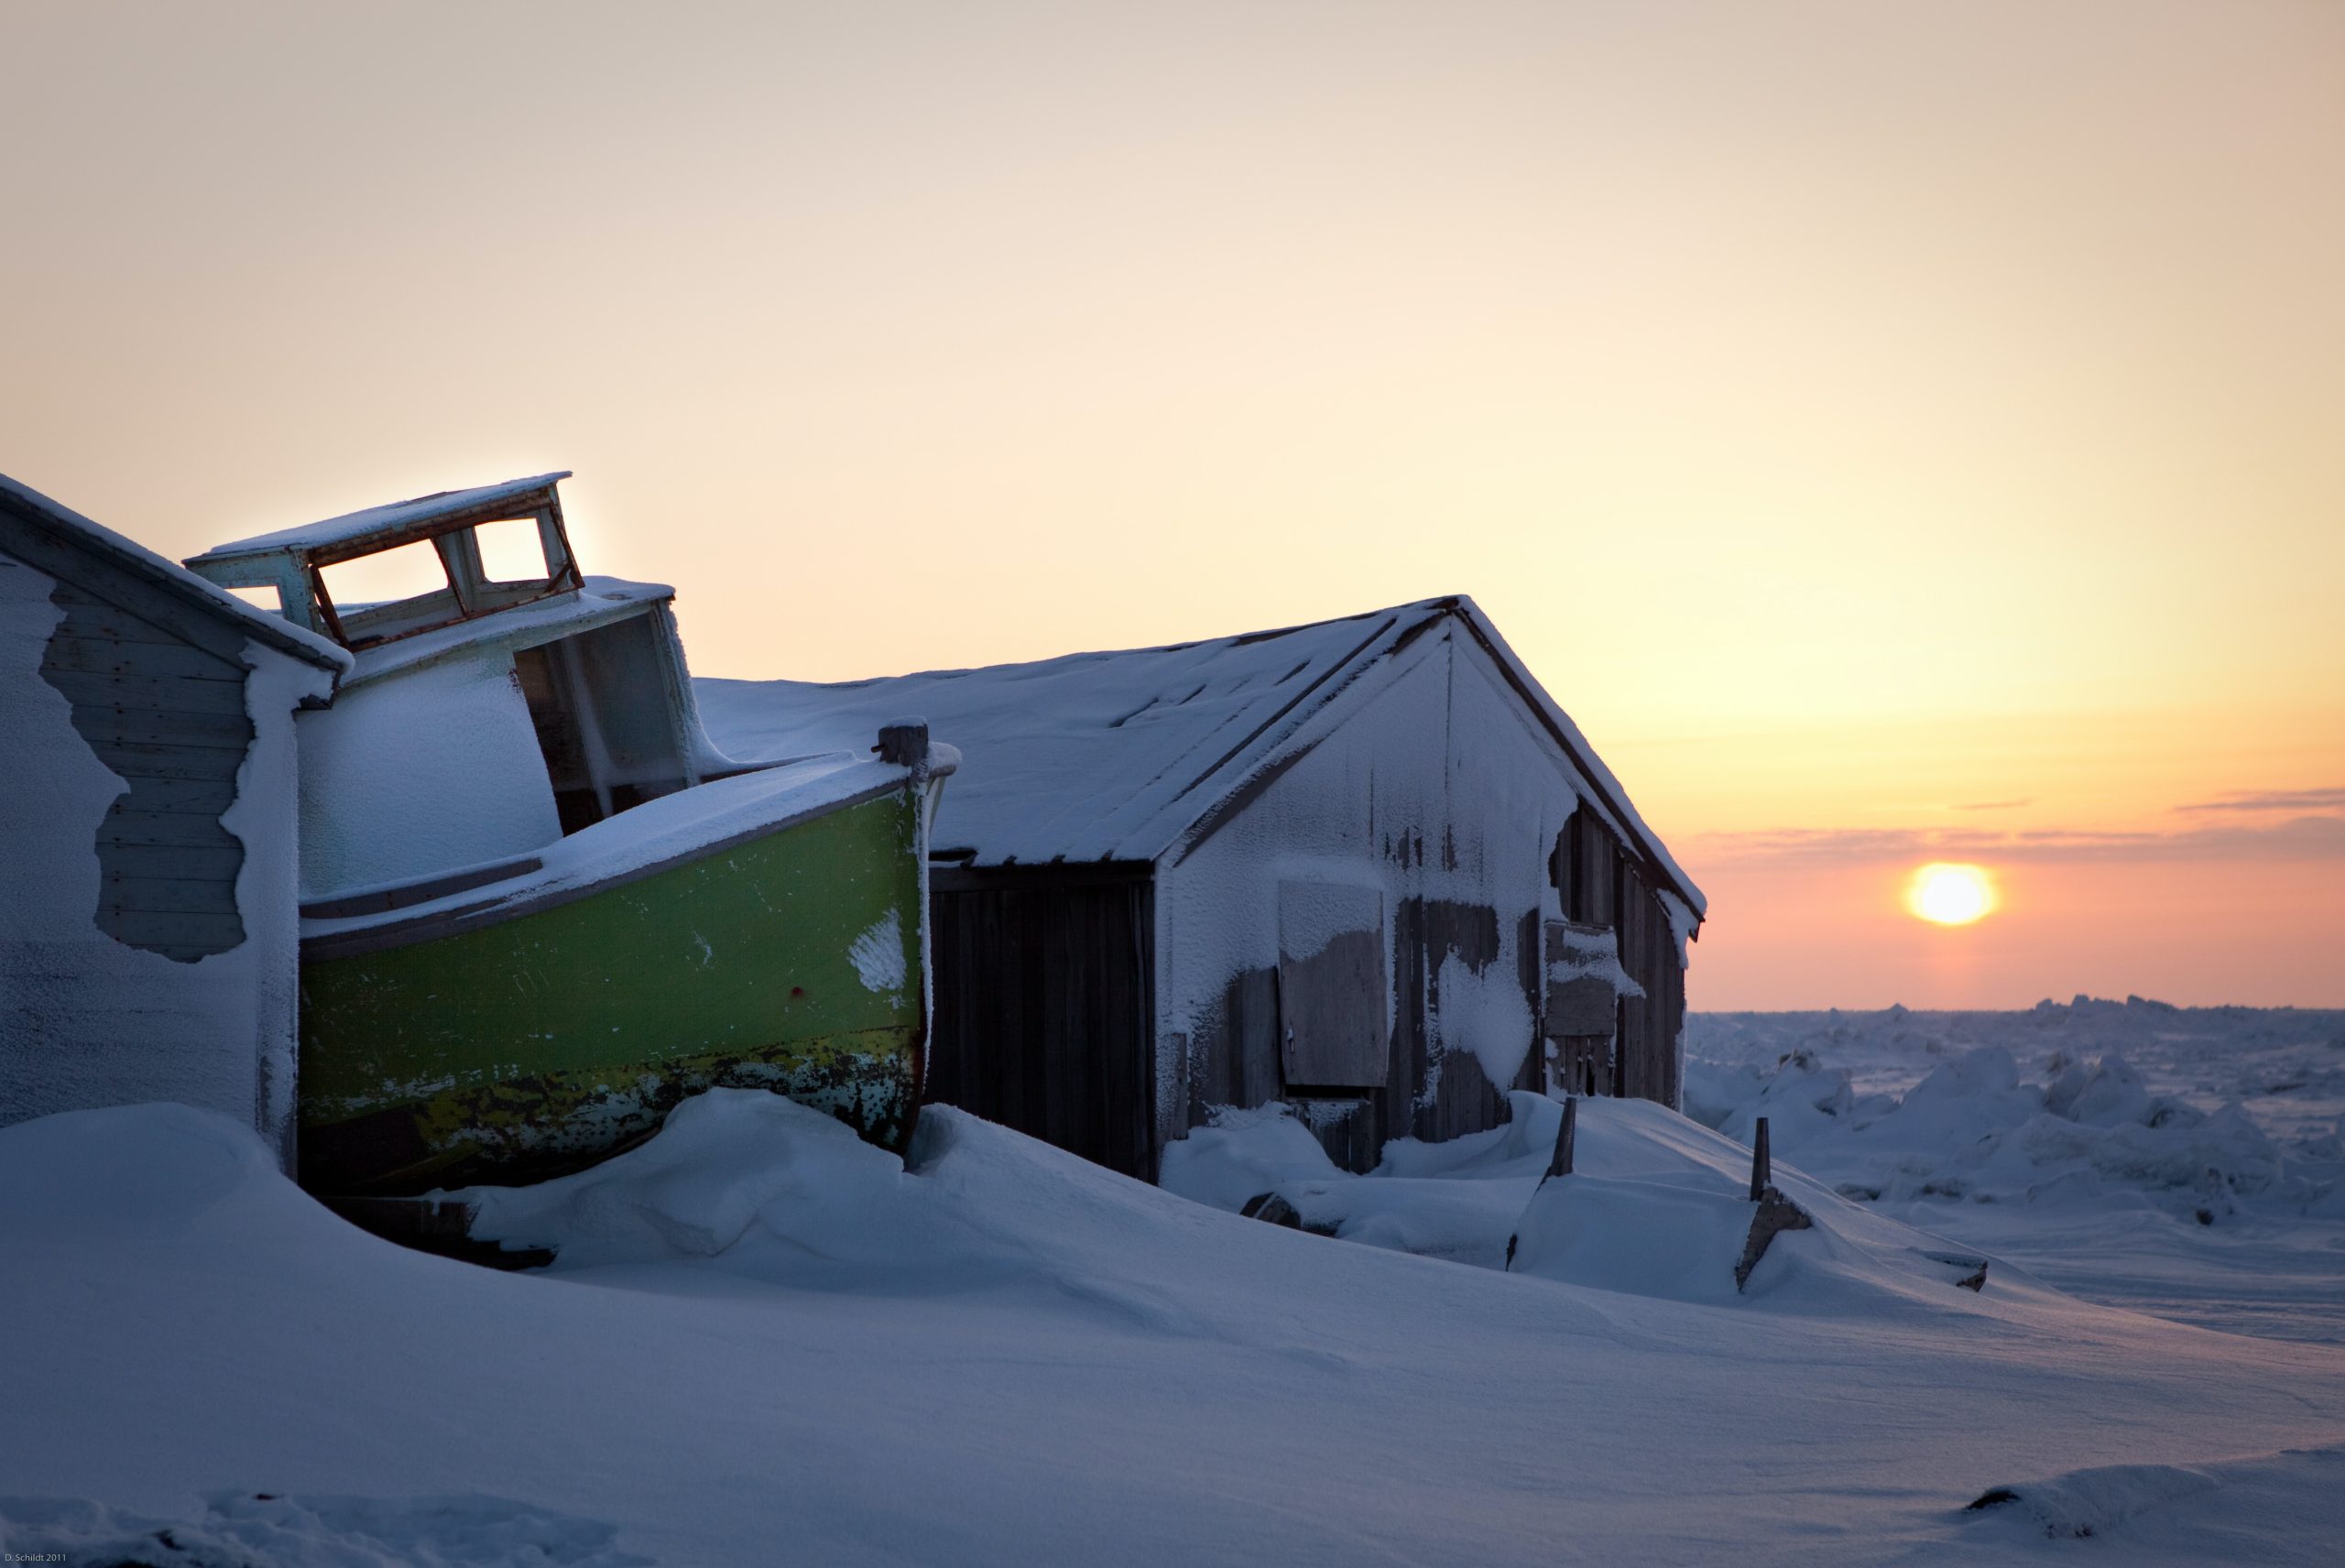 snow and boats in Barrow, AK